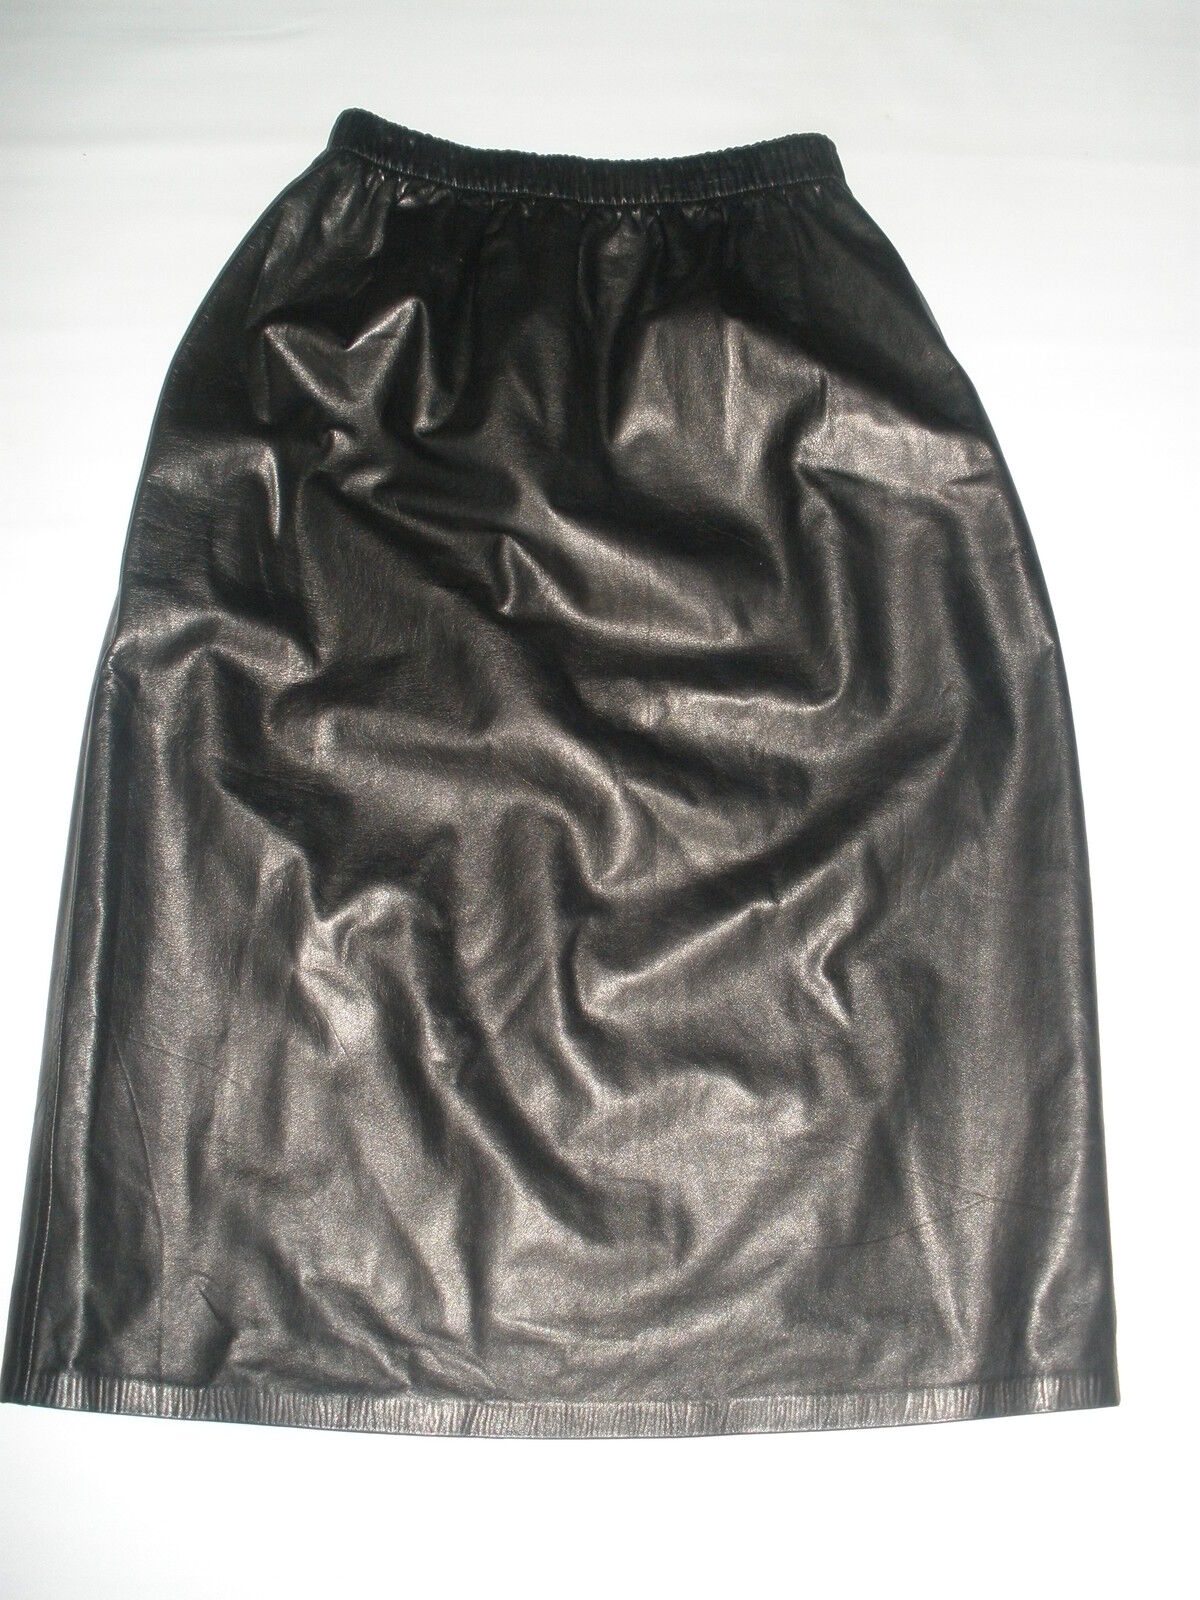 ARION USA SEXY BLACK LEATHER skirt  SIZE M NEW HOT